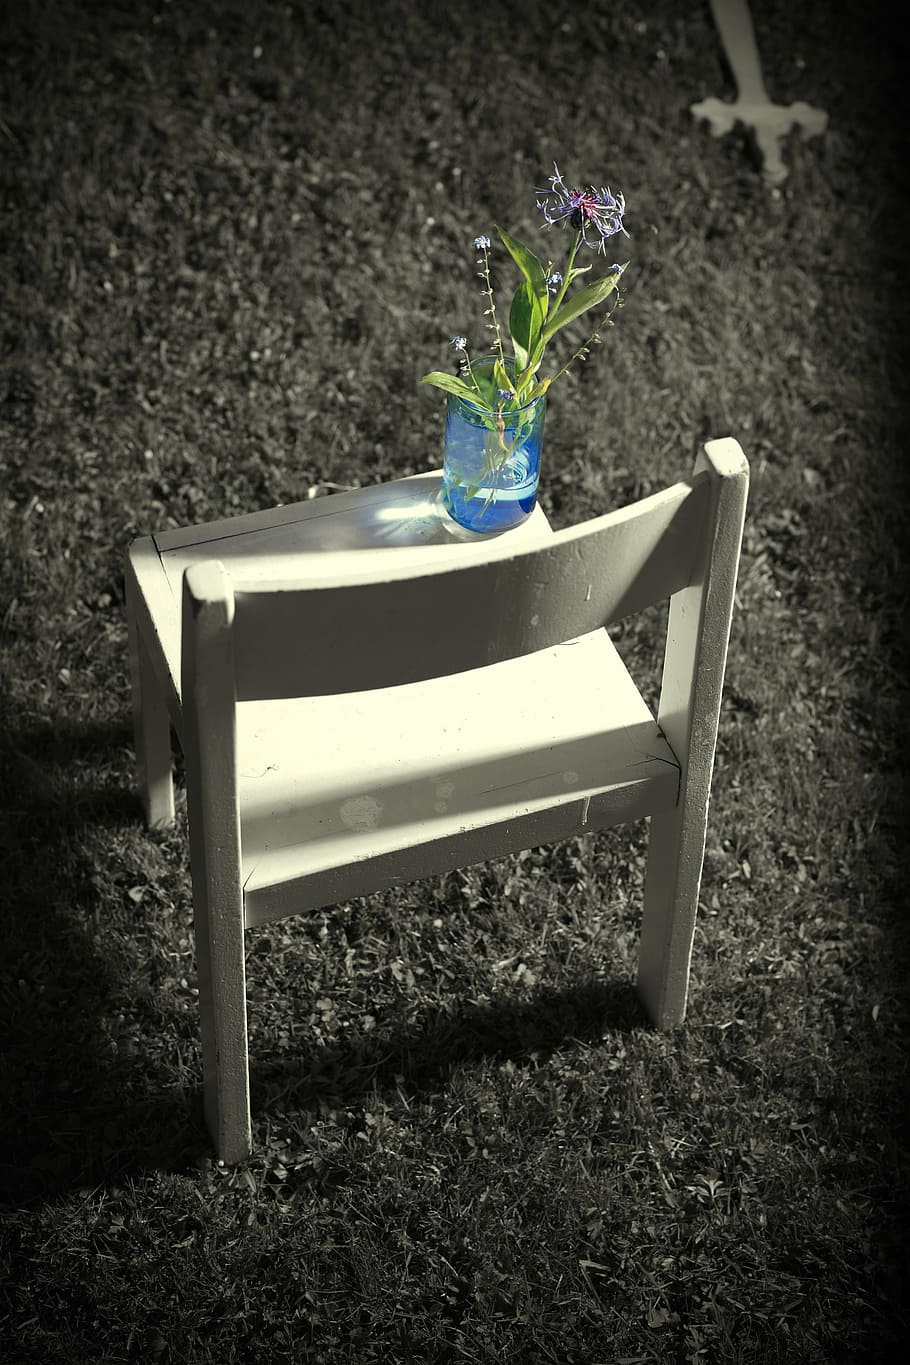 green plant in glass vase on chair, loss, sadness, pain, mourning, HD wallpaper